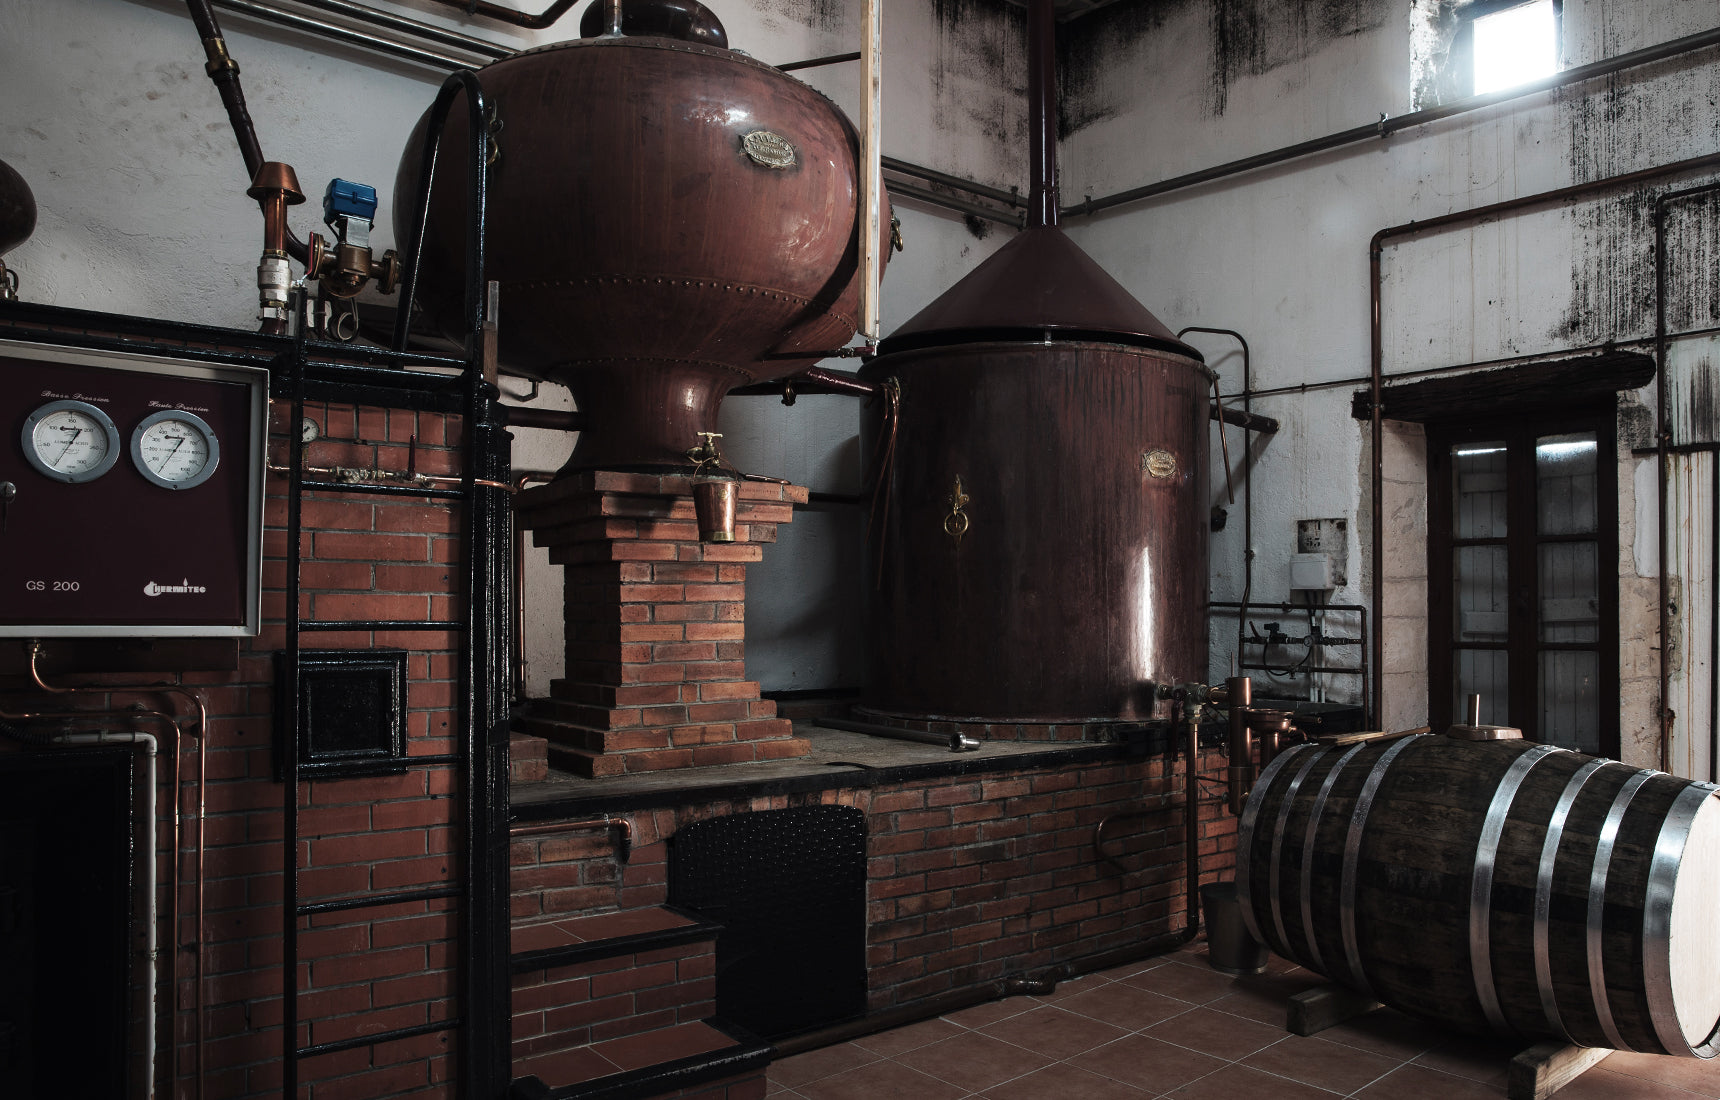 The Cognac is made in traditional alembic copper pot stills. Copper is a great conductor and disperser of heat. It also cancels out any sulphuric flavour that would cause bitterness in the spirit. Photo by Cognac Lhéraud.